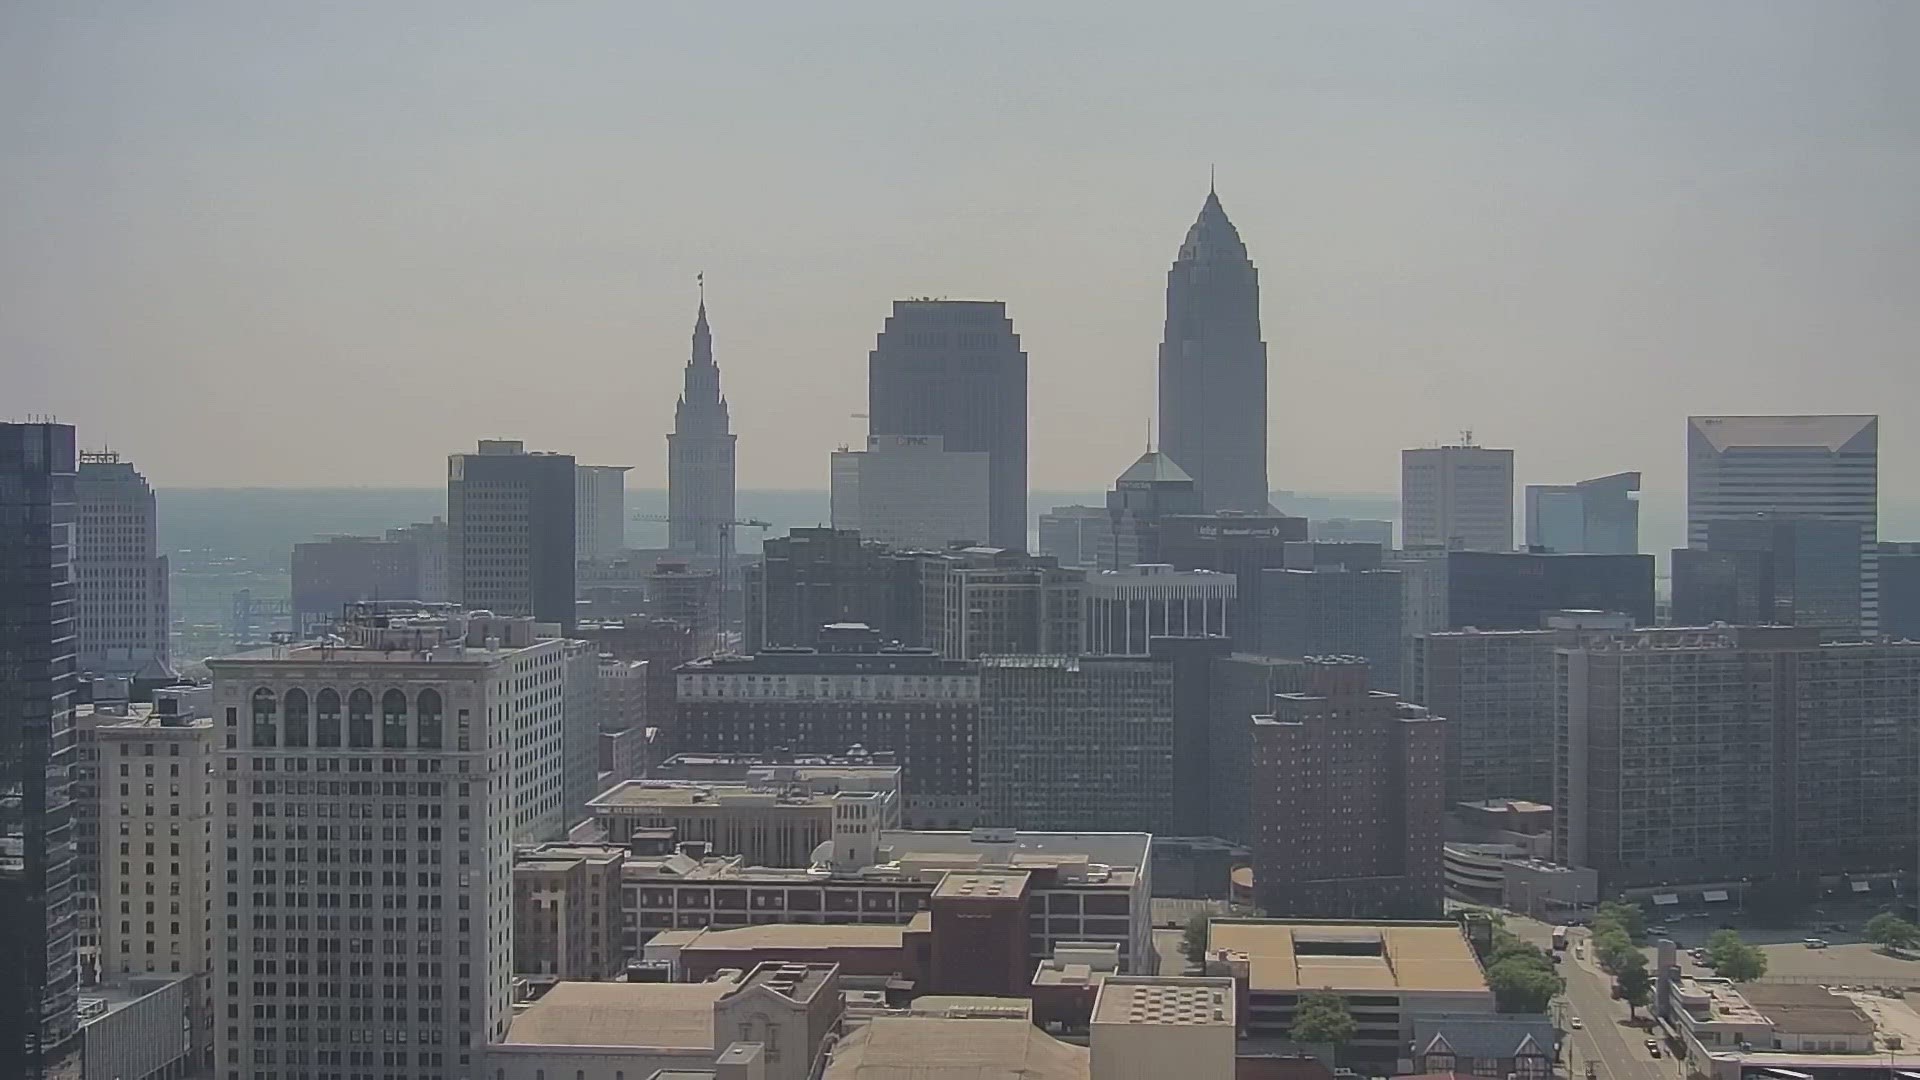 Officials warn the air quality levels 'will be unhealthy for sensitive groups.'